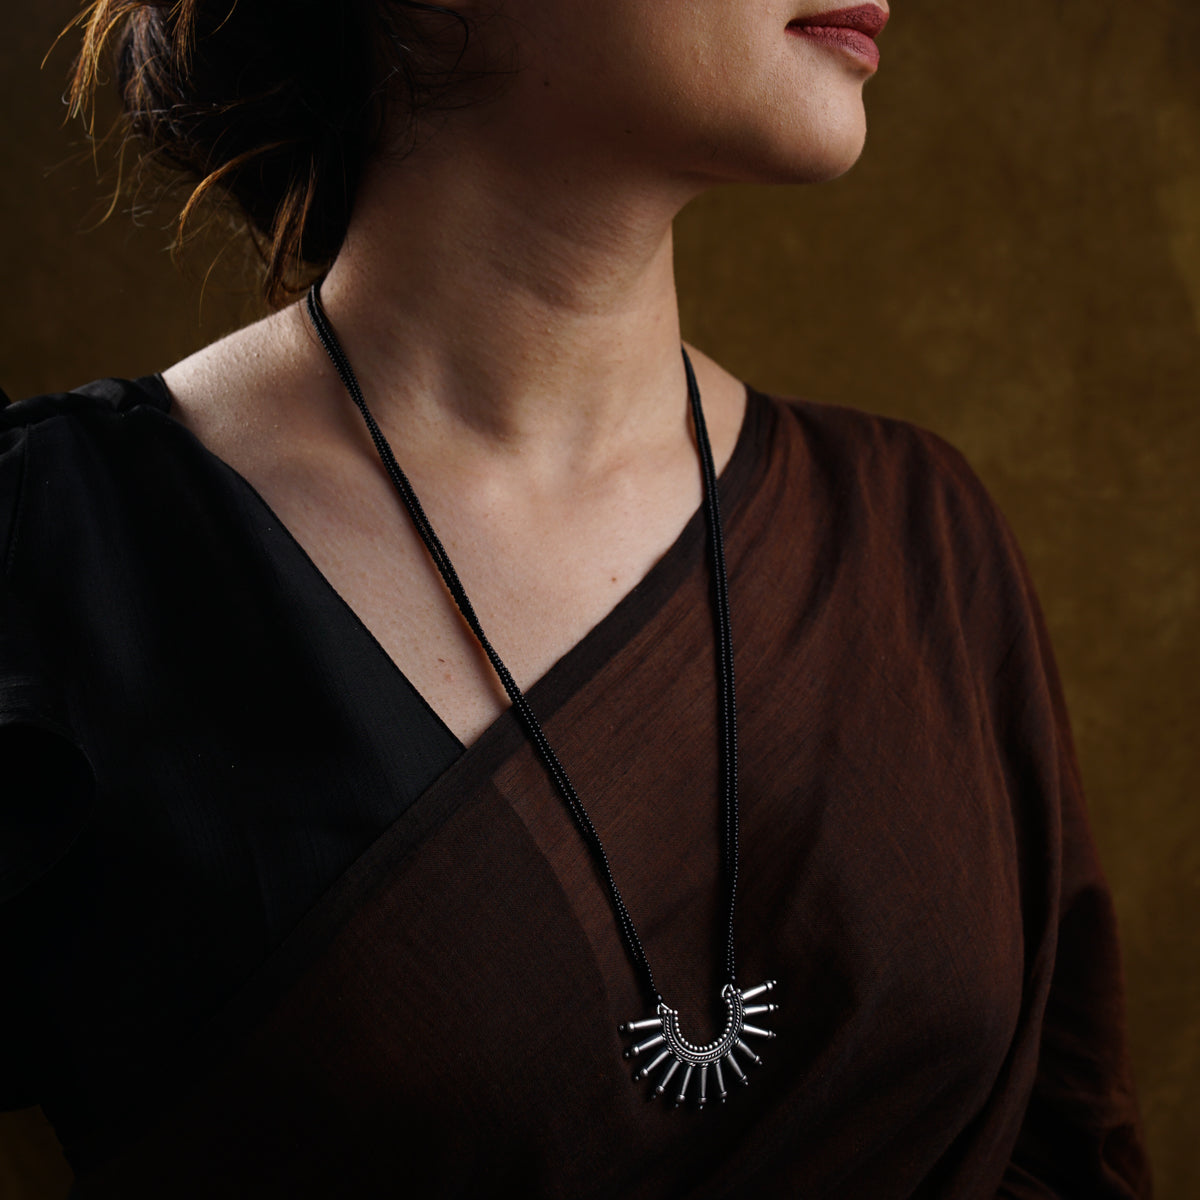 a woman wearing a brown shirt and a black necklace